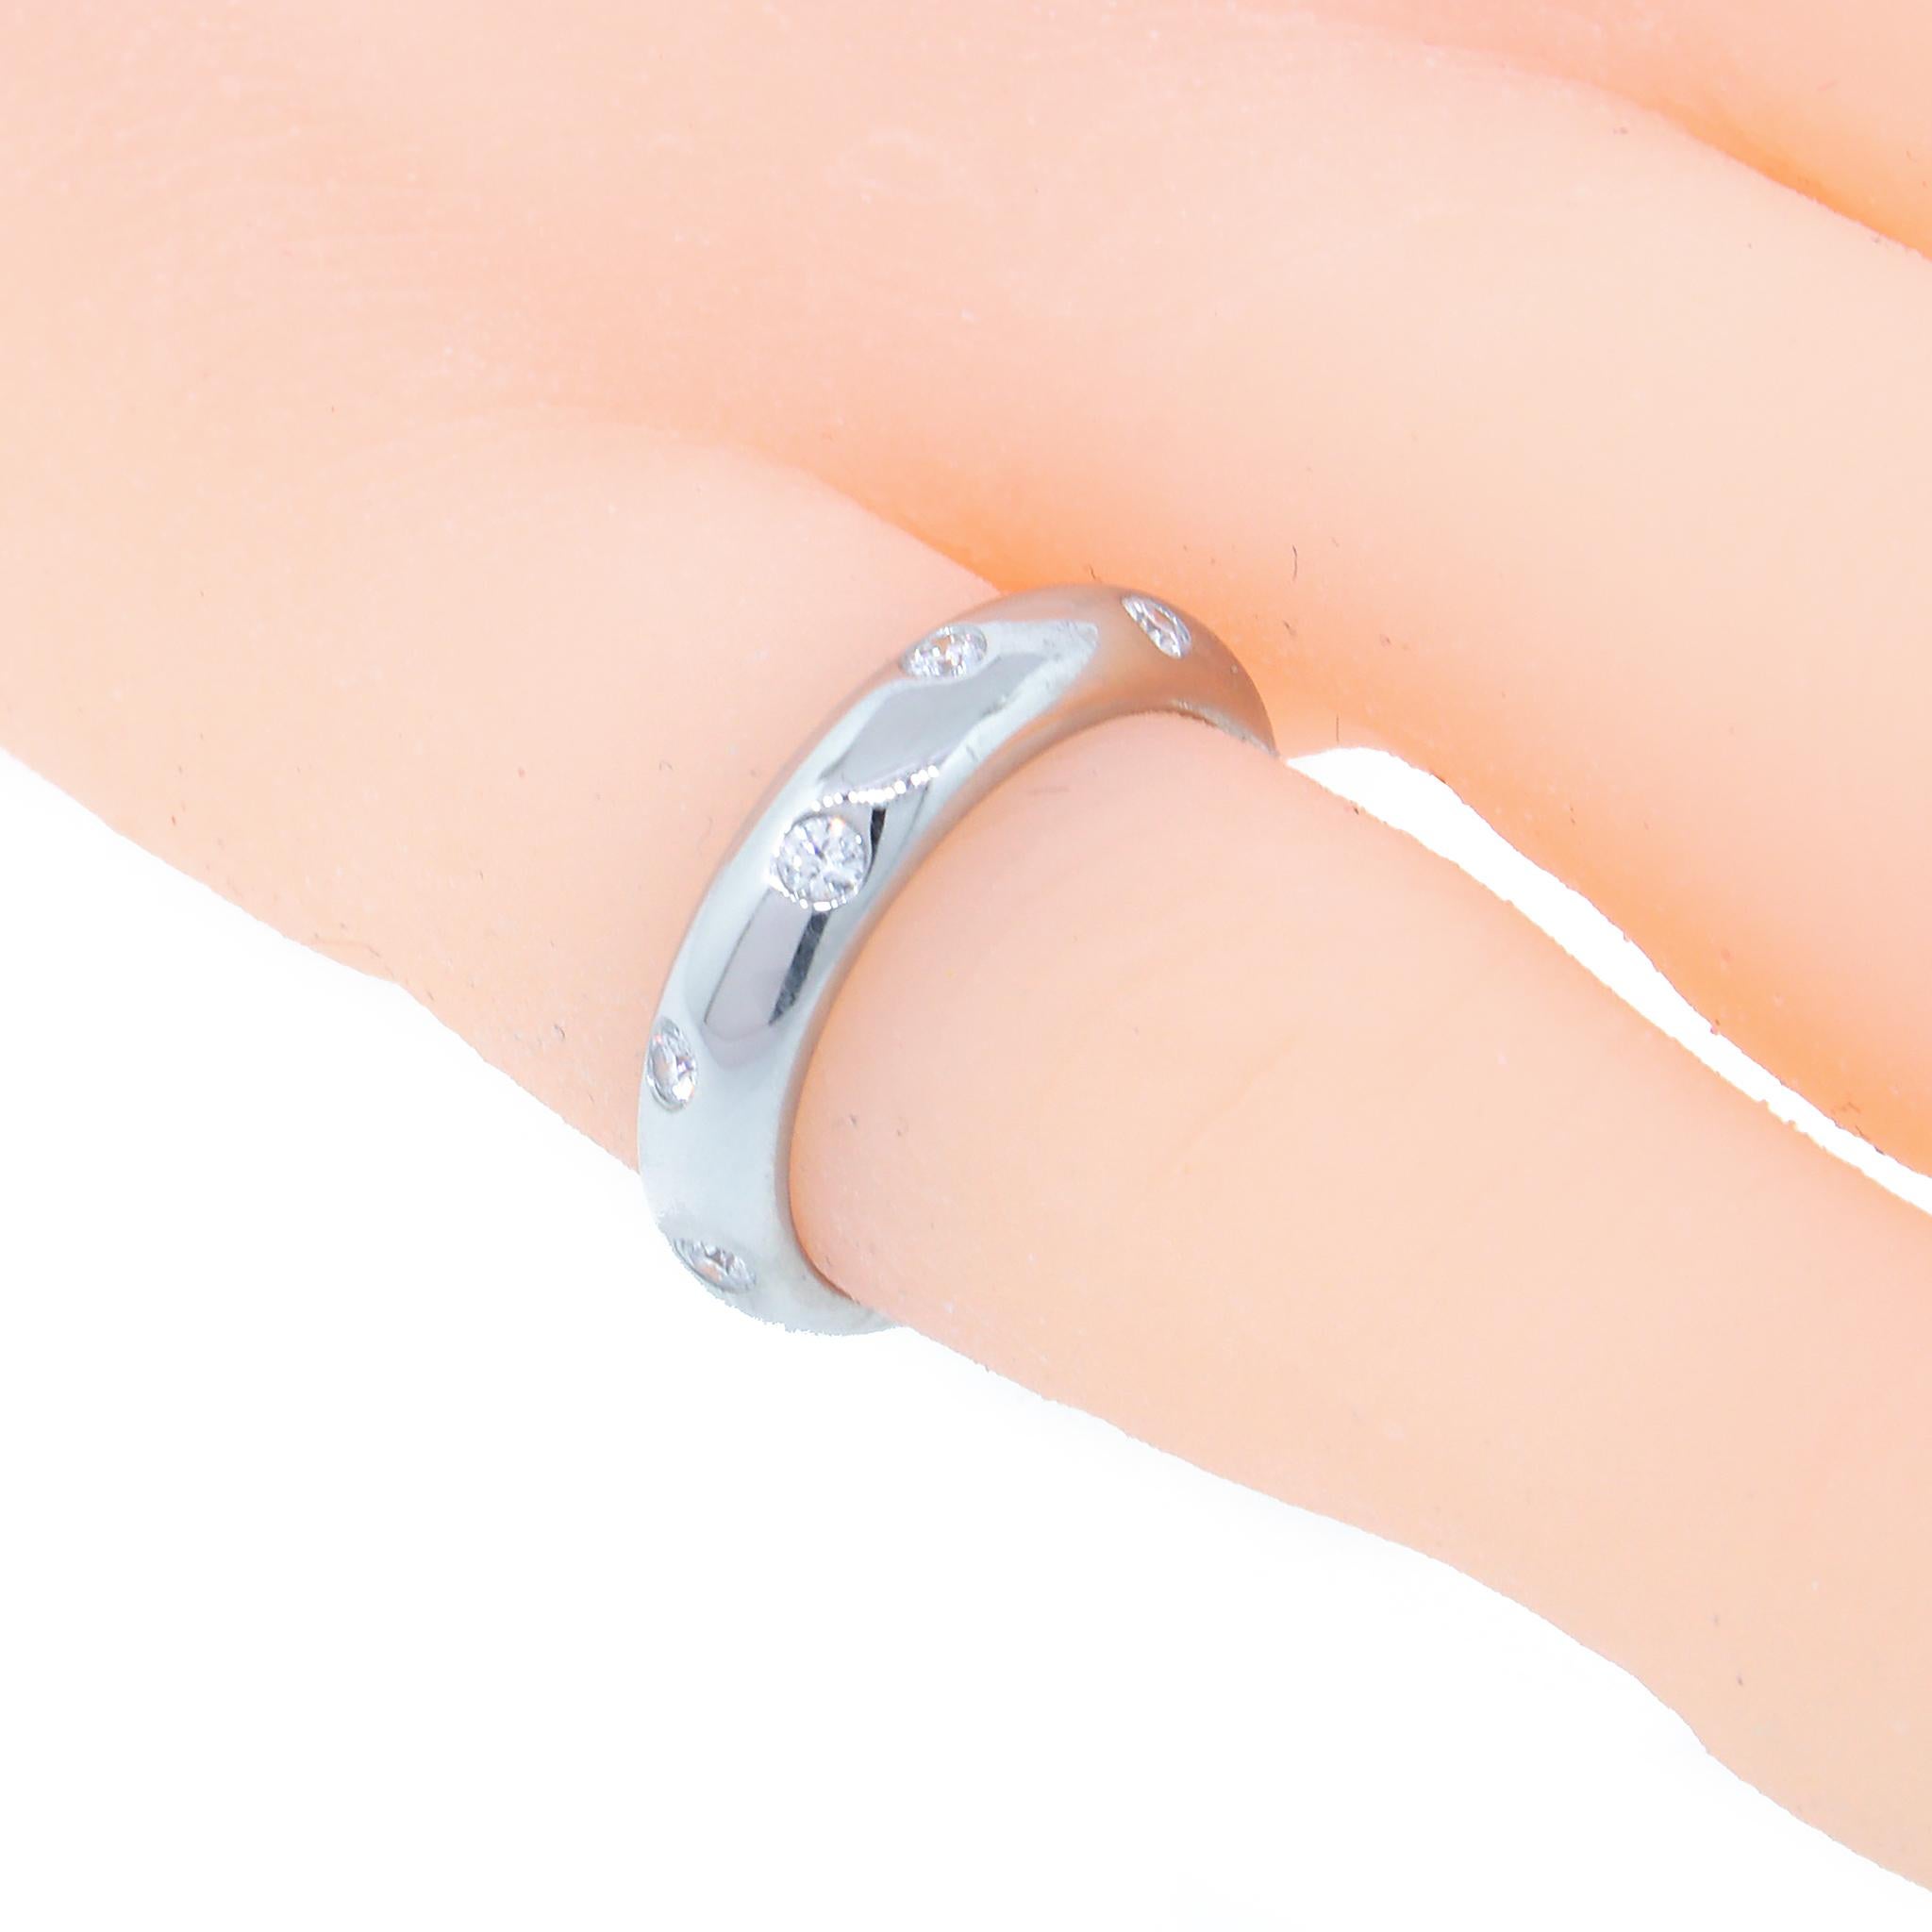 Modern and streamlined, yet perfectly timeless.

Platinum
Diamond: 0.22 ct twd
Ring Size 4
Total Weight: 6.5 grams